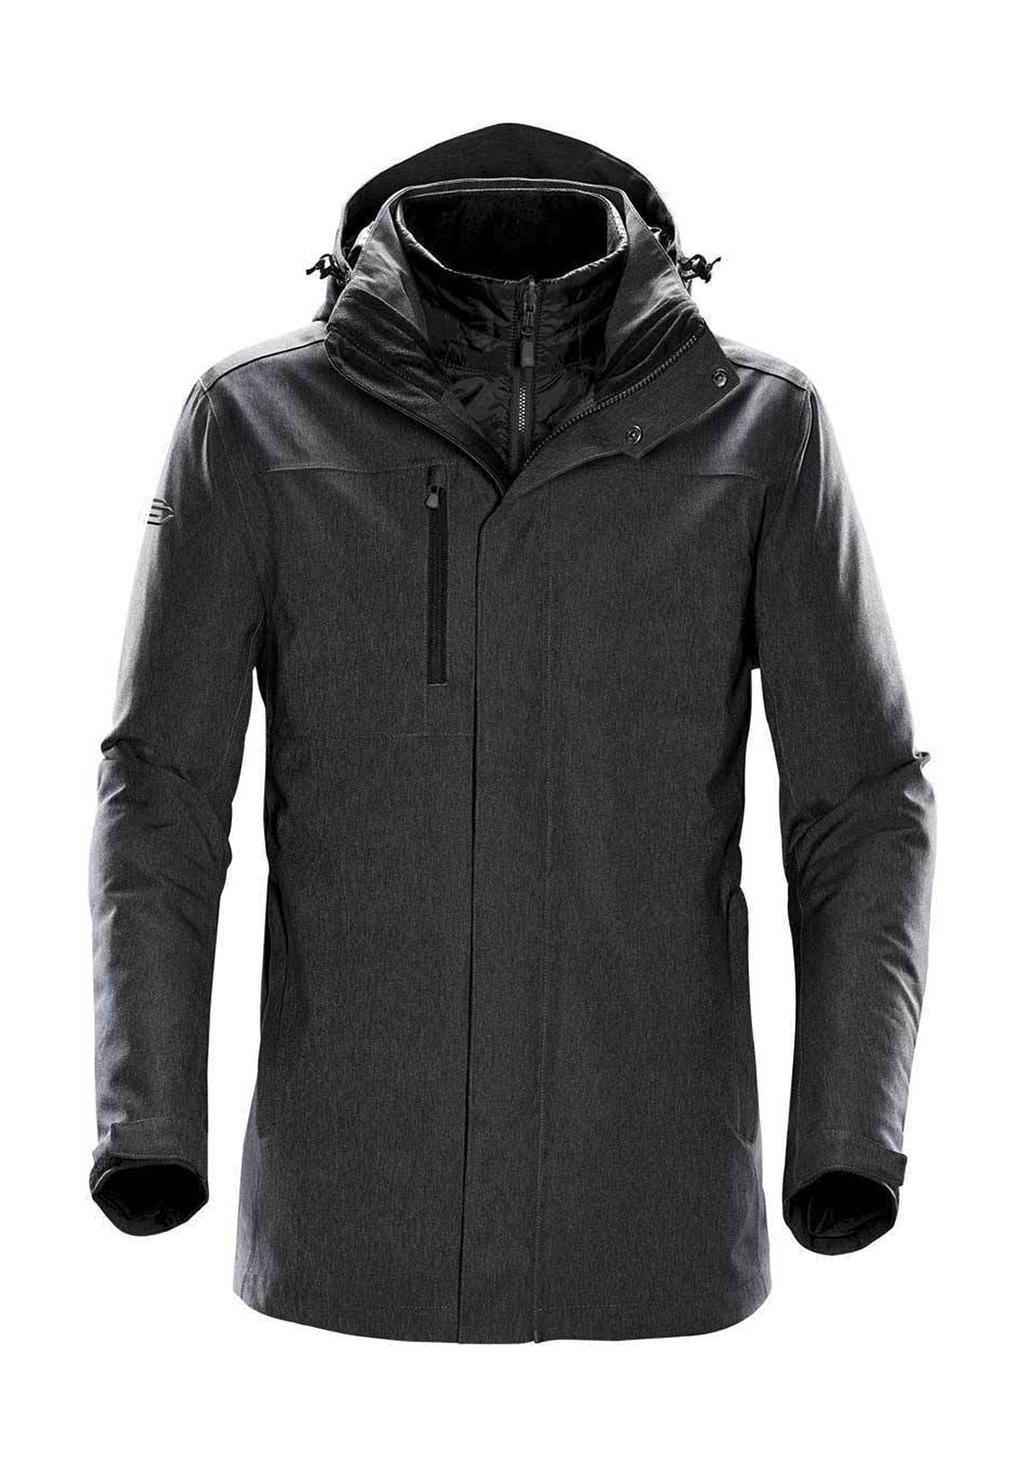  Mens Avalanche System Jacket in Farbe Charcoal Twill